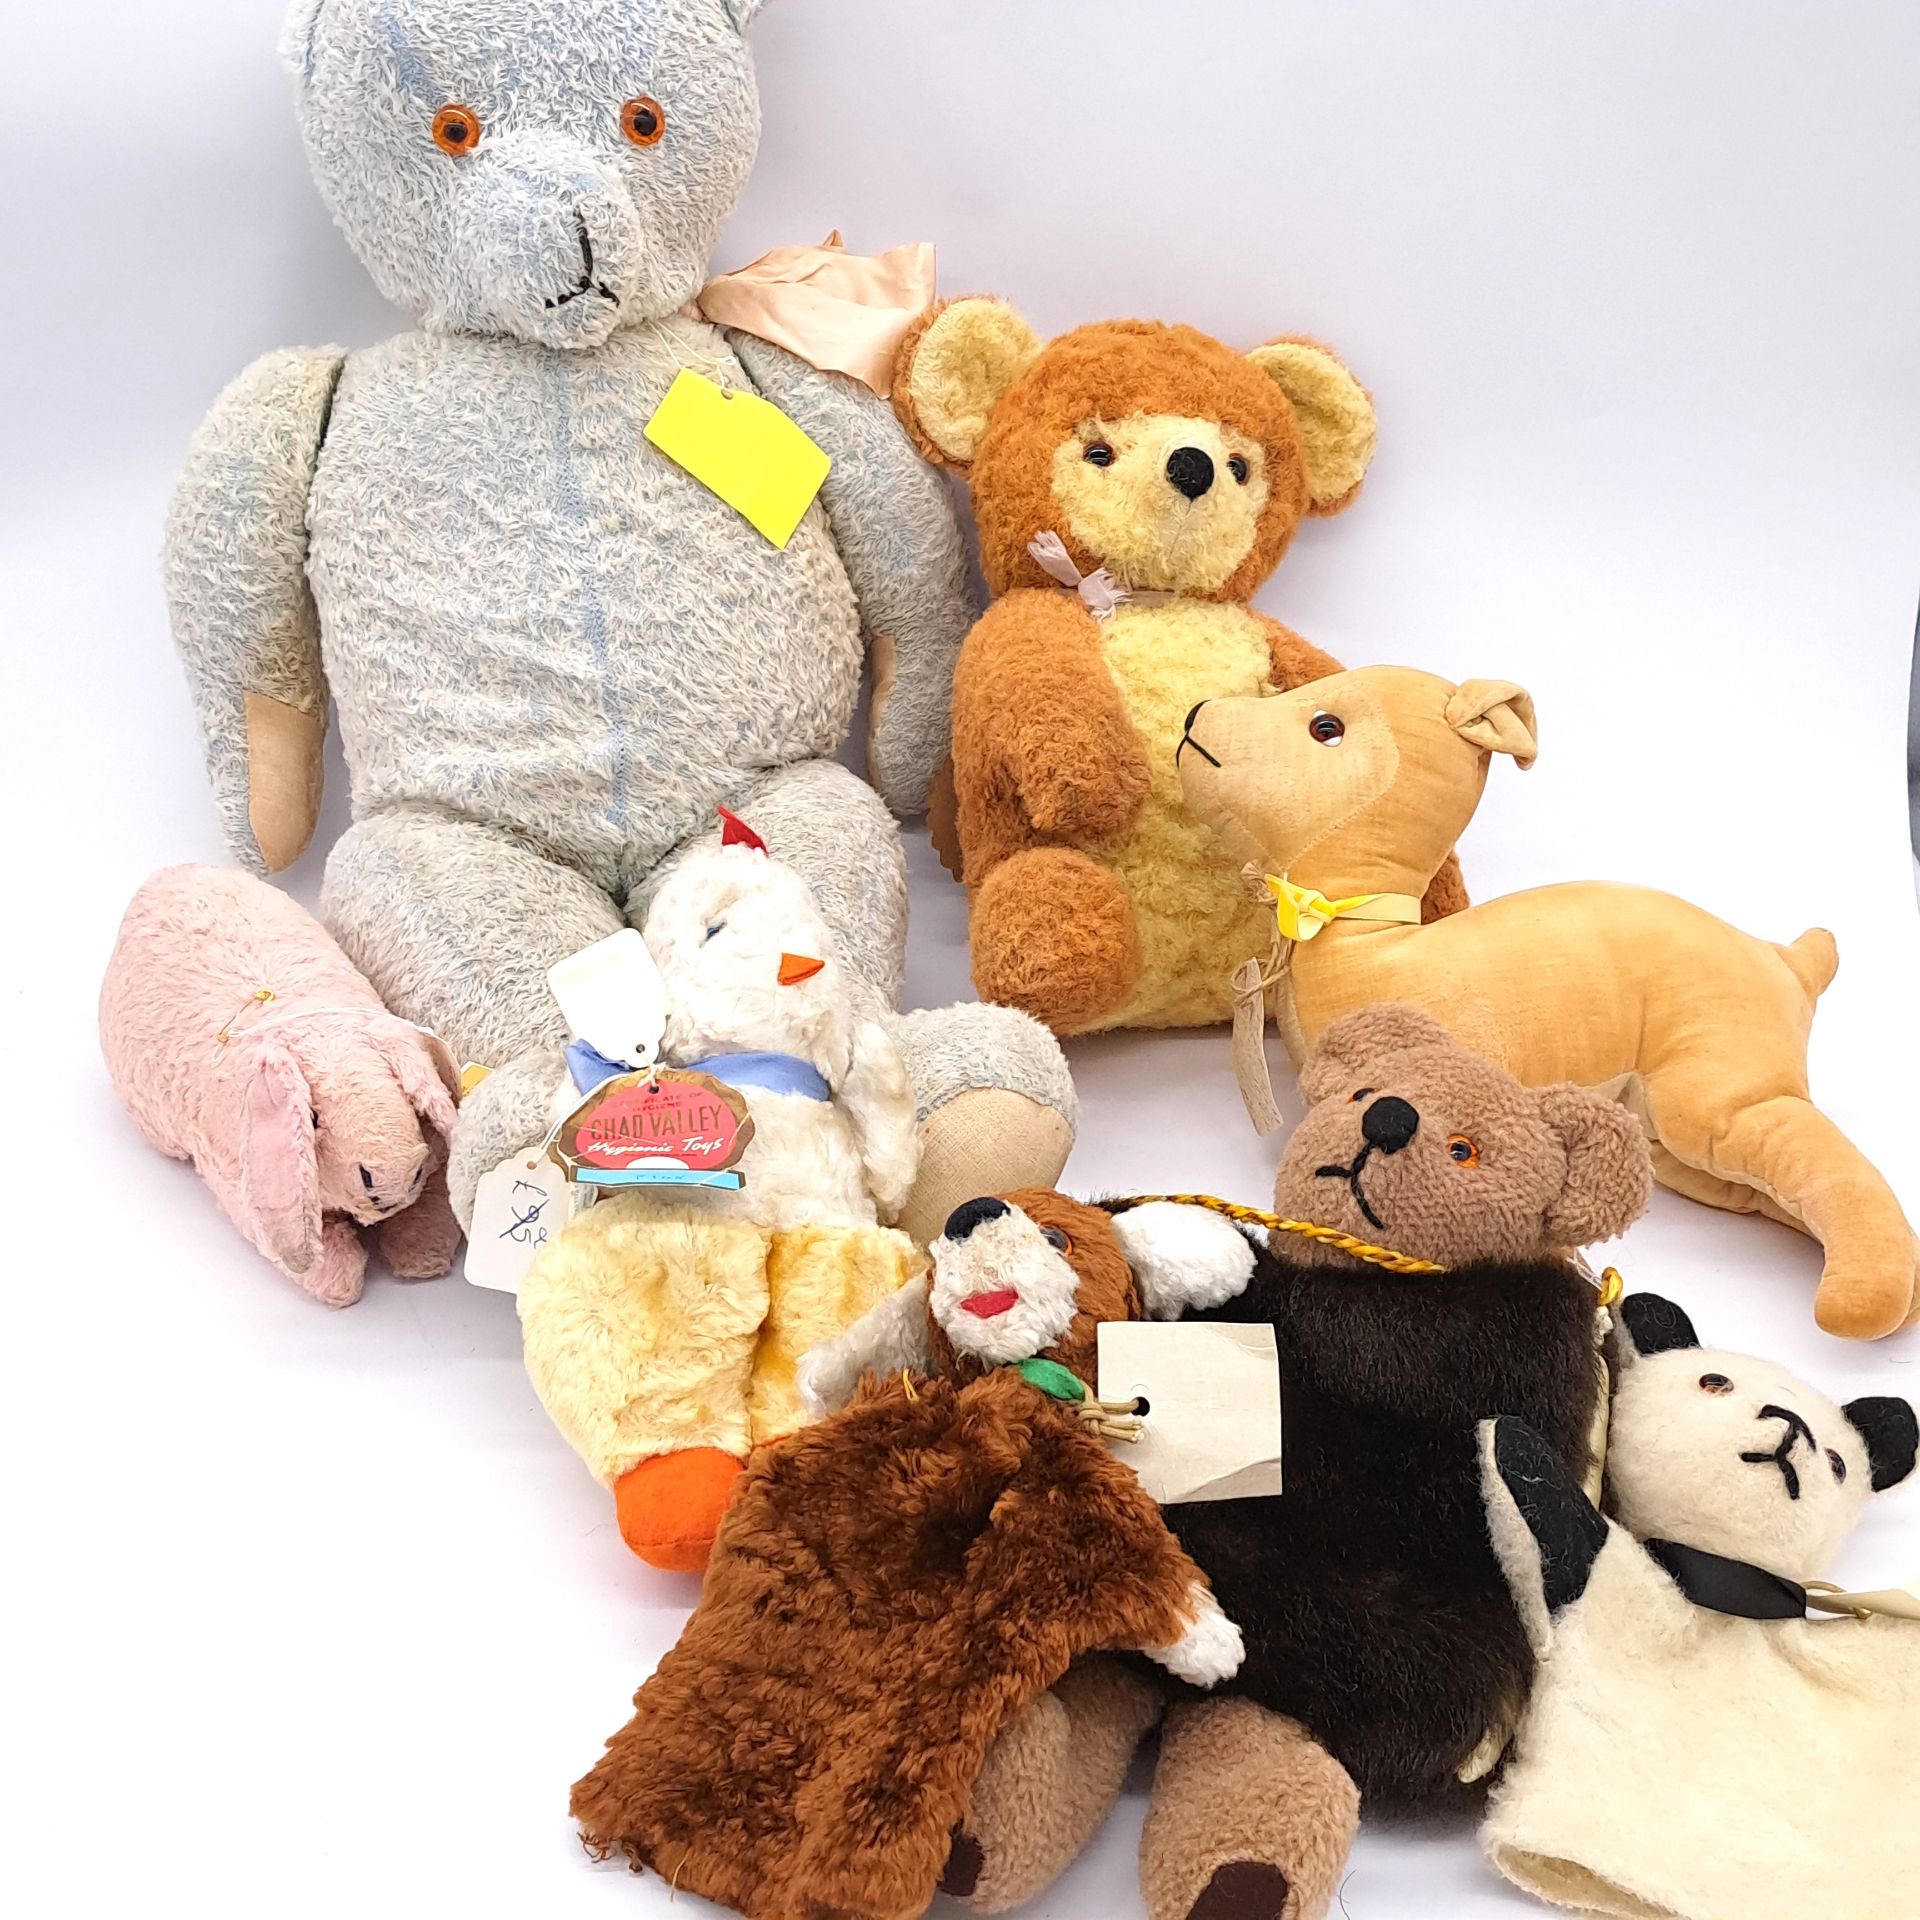 Assortment of vintage teddy bears/toys, including Chad Valley